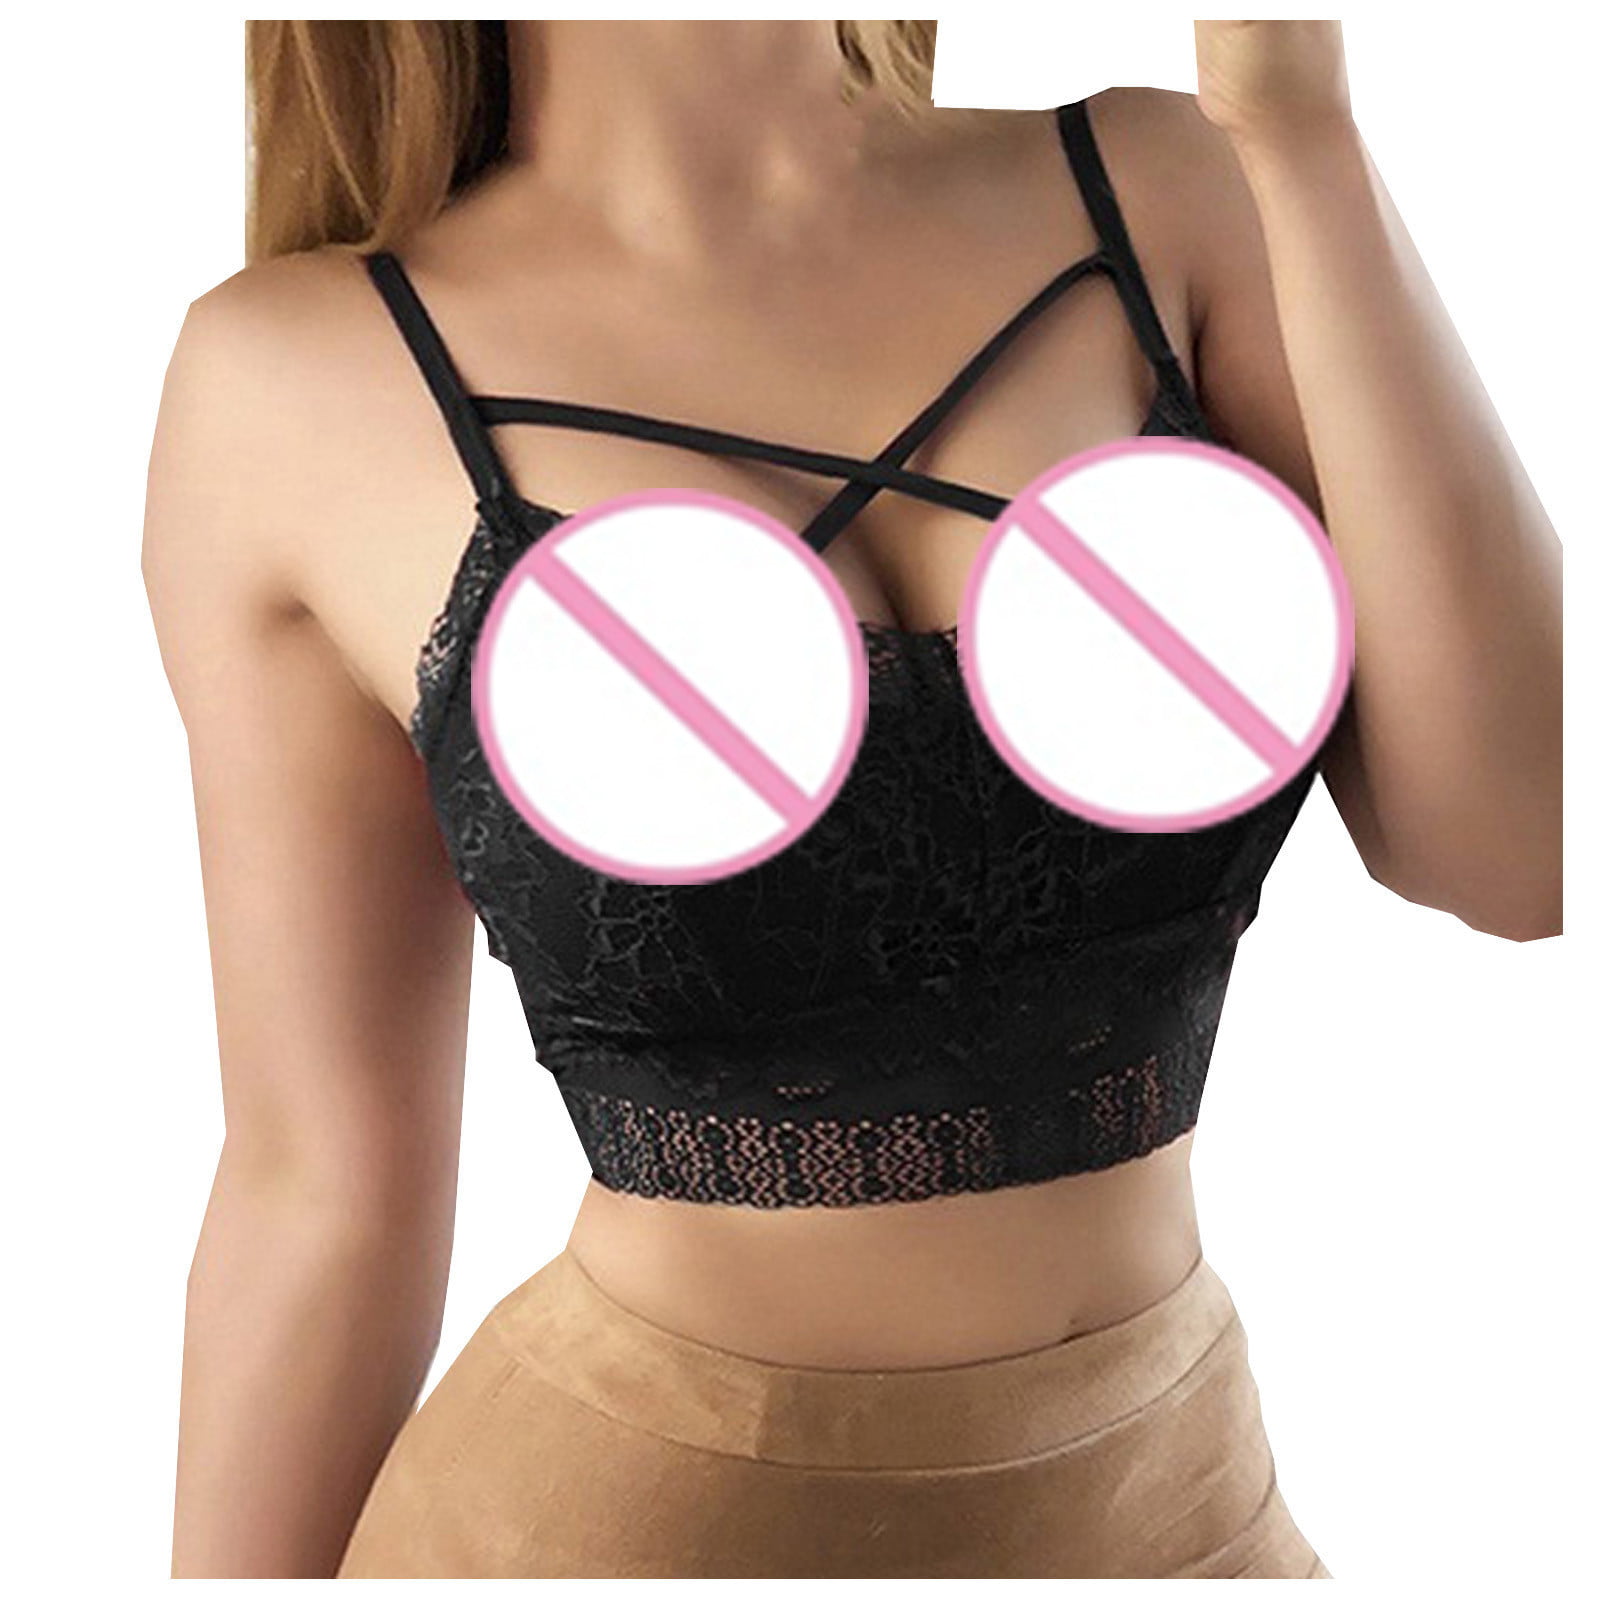 Bigersell T-Shirt Bra Women Lace Backless Tube Tops Wrap Chest Bottoming  Vest Hollow Bra Short Size Training Bra, Style 14621, Wine 38B 